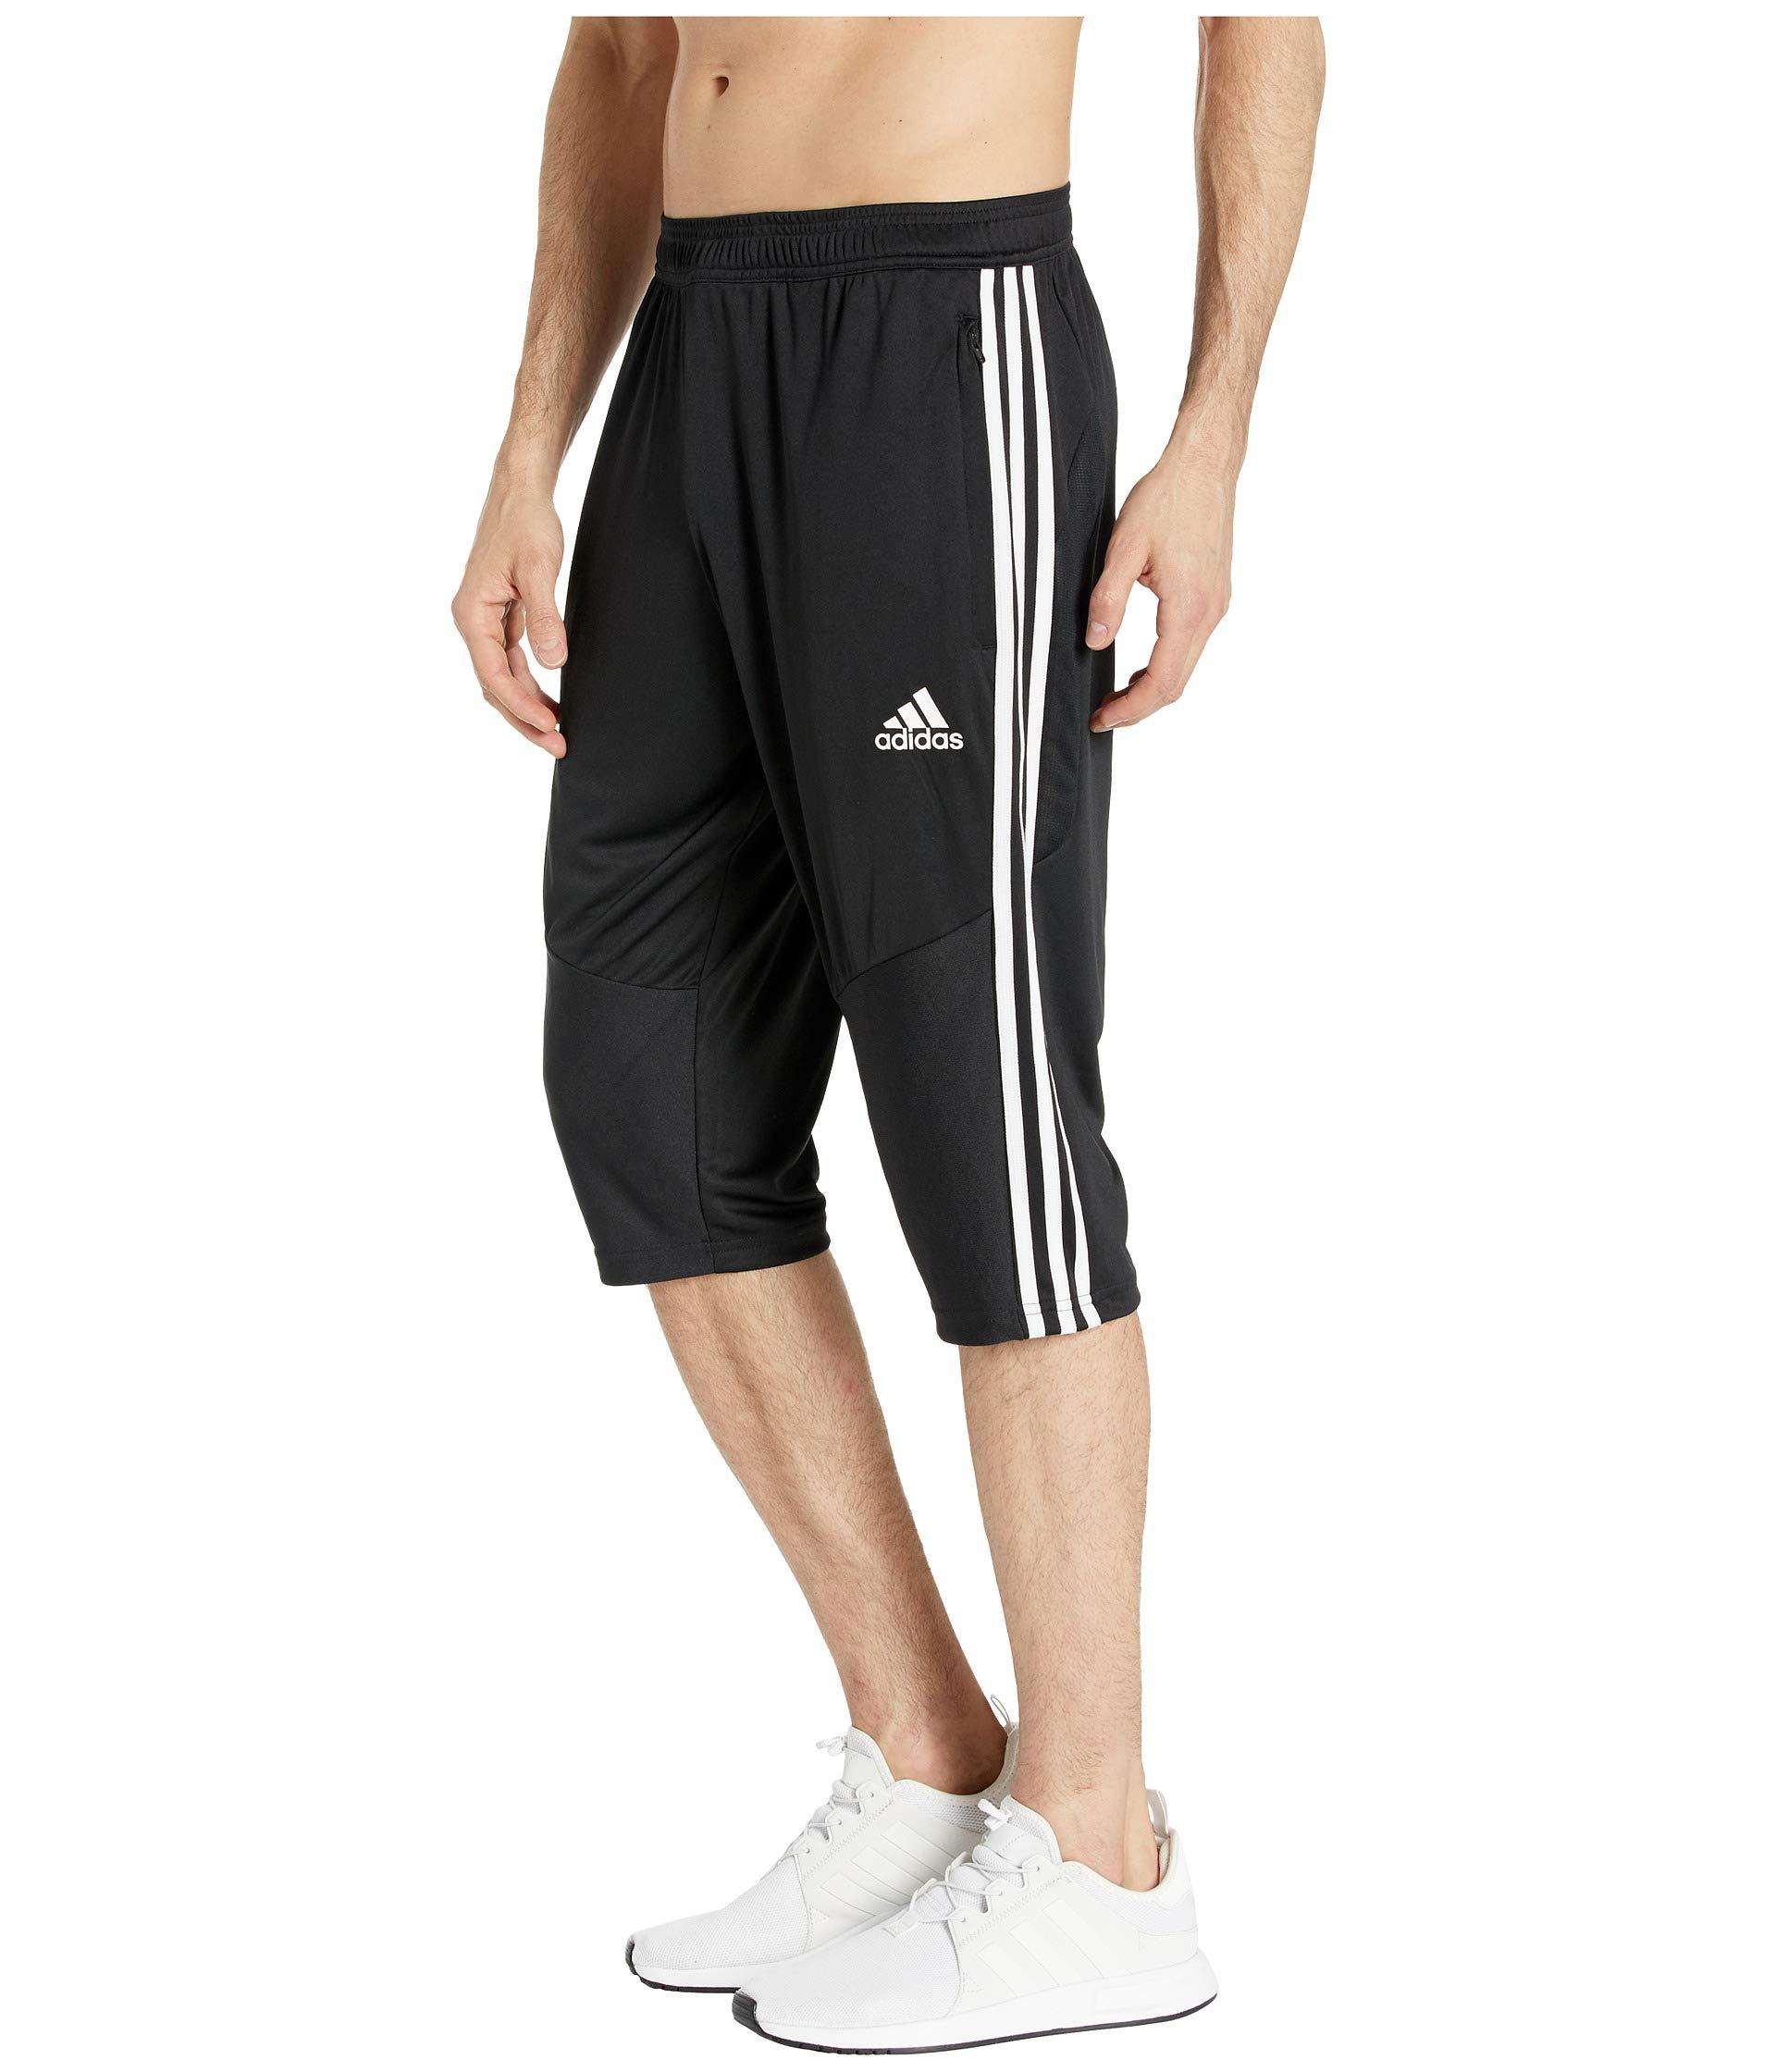 adidas Synthetic Tiro 3/4 Pants in Black for Men - Lyst